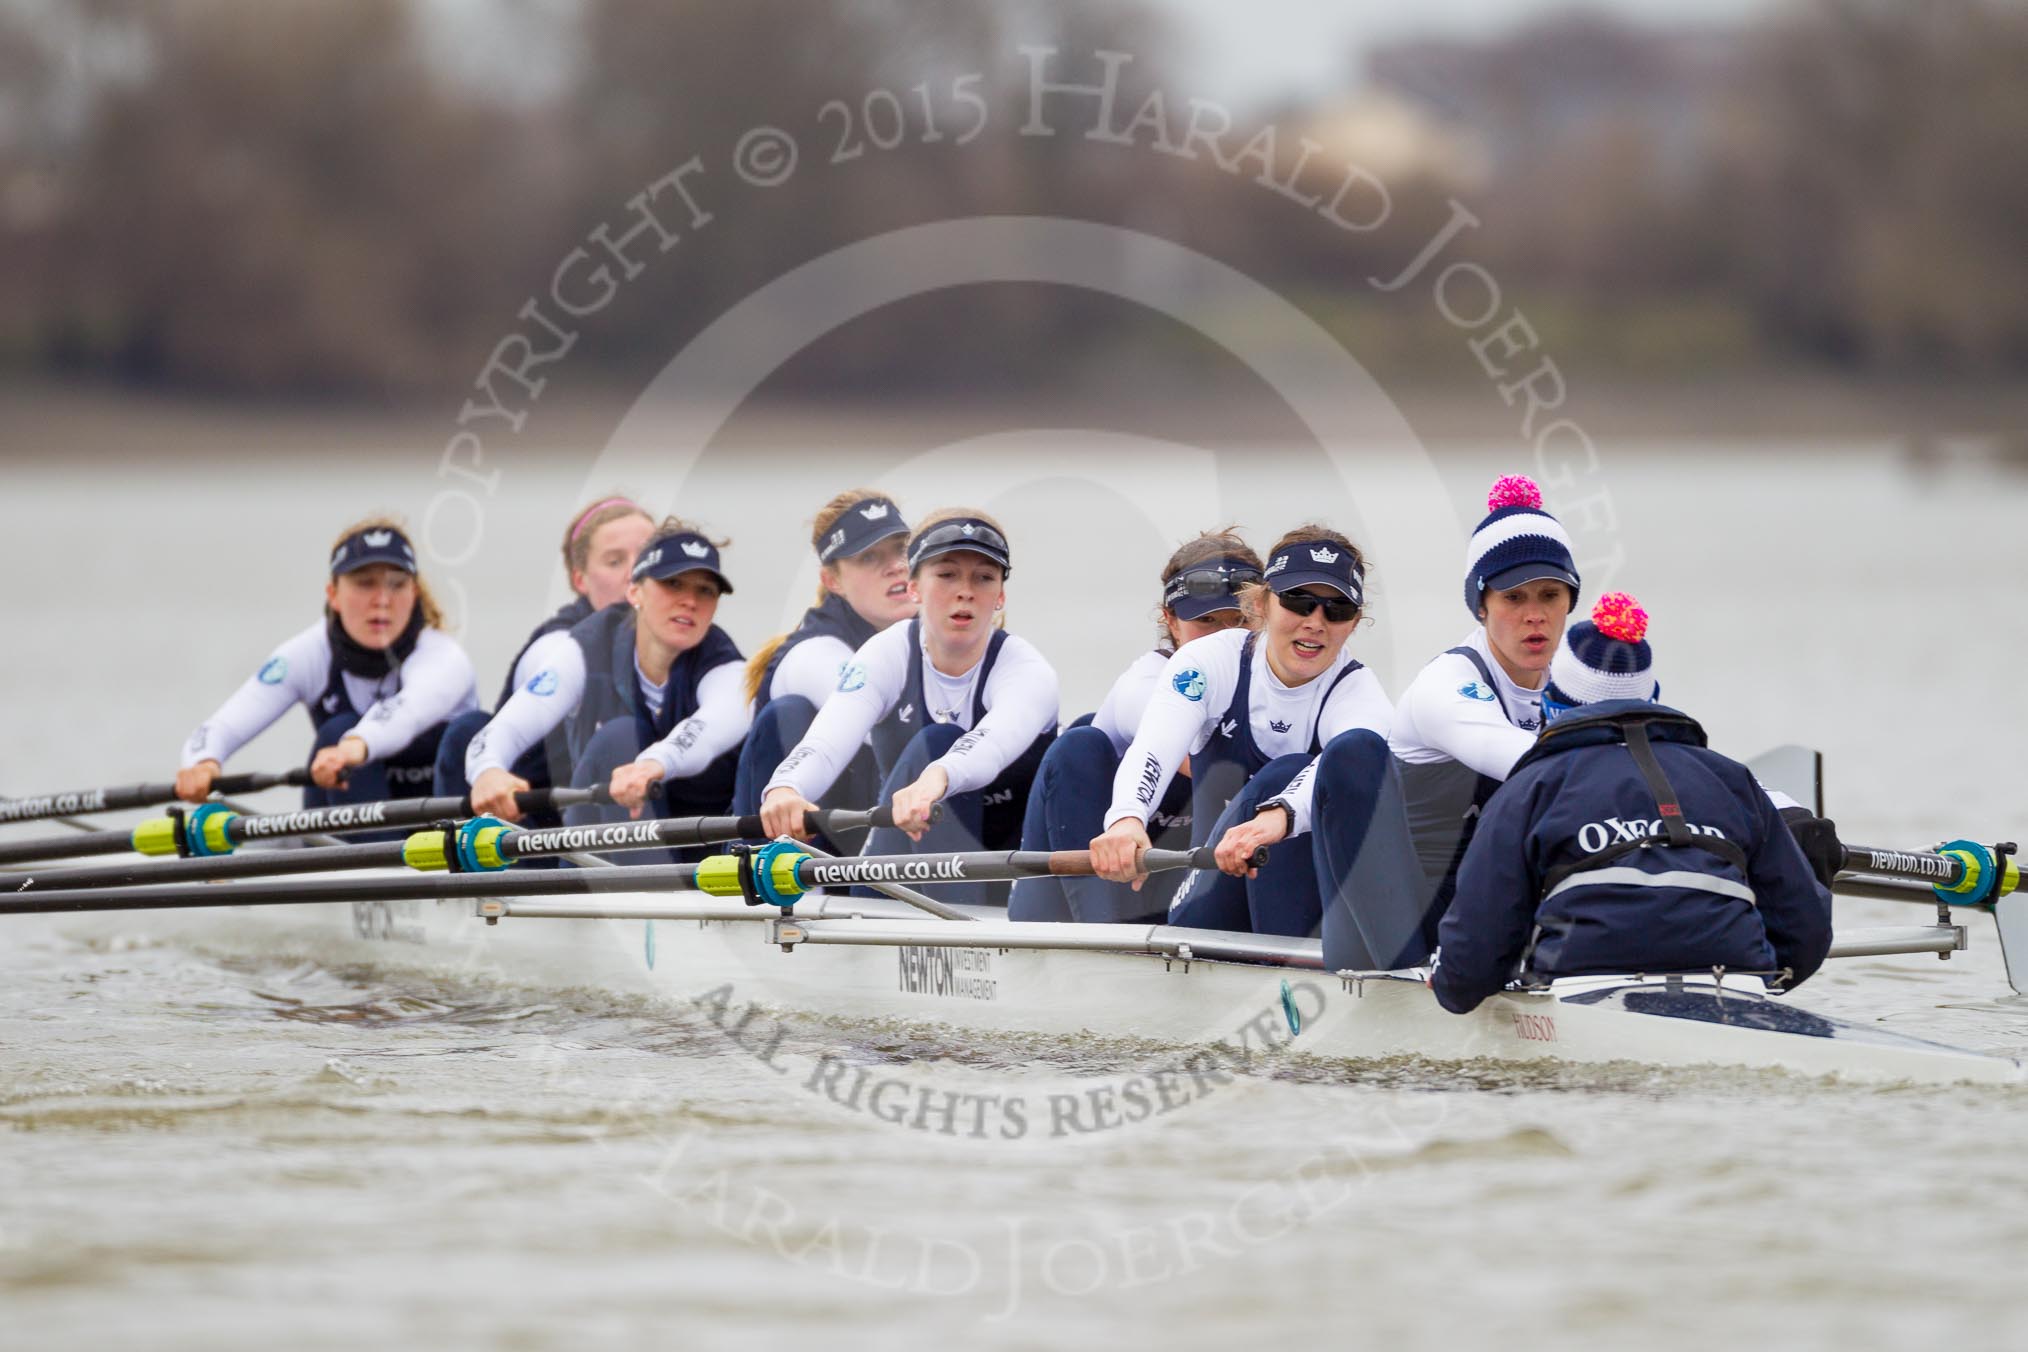 Shortly after the start of the first race - the OUWBC boat with Maxie Scheske, Anastasia Chitty, Shelley Pearson, Emily Reynolds, Amber De Vere, Lauren Kedar, Nadine Gradel Iberg, Caryn Davies, and cox Jennifer Ehr